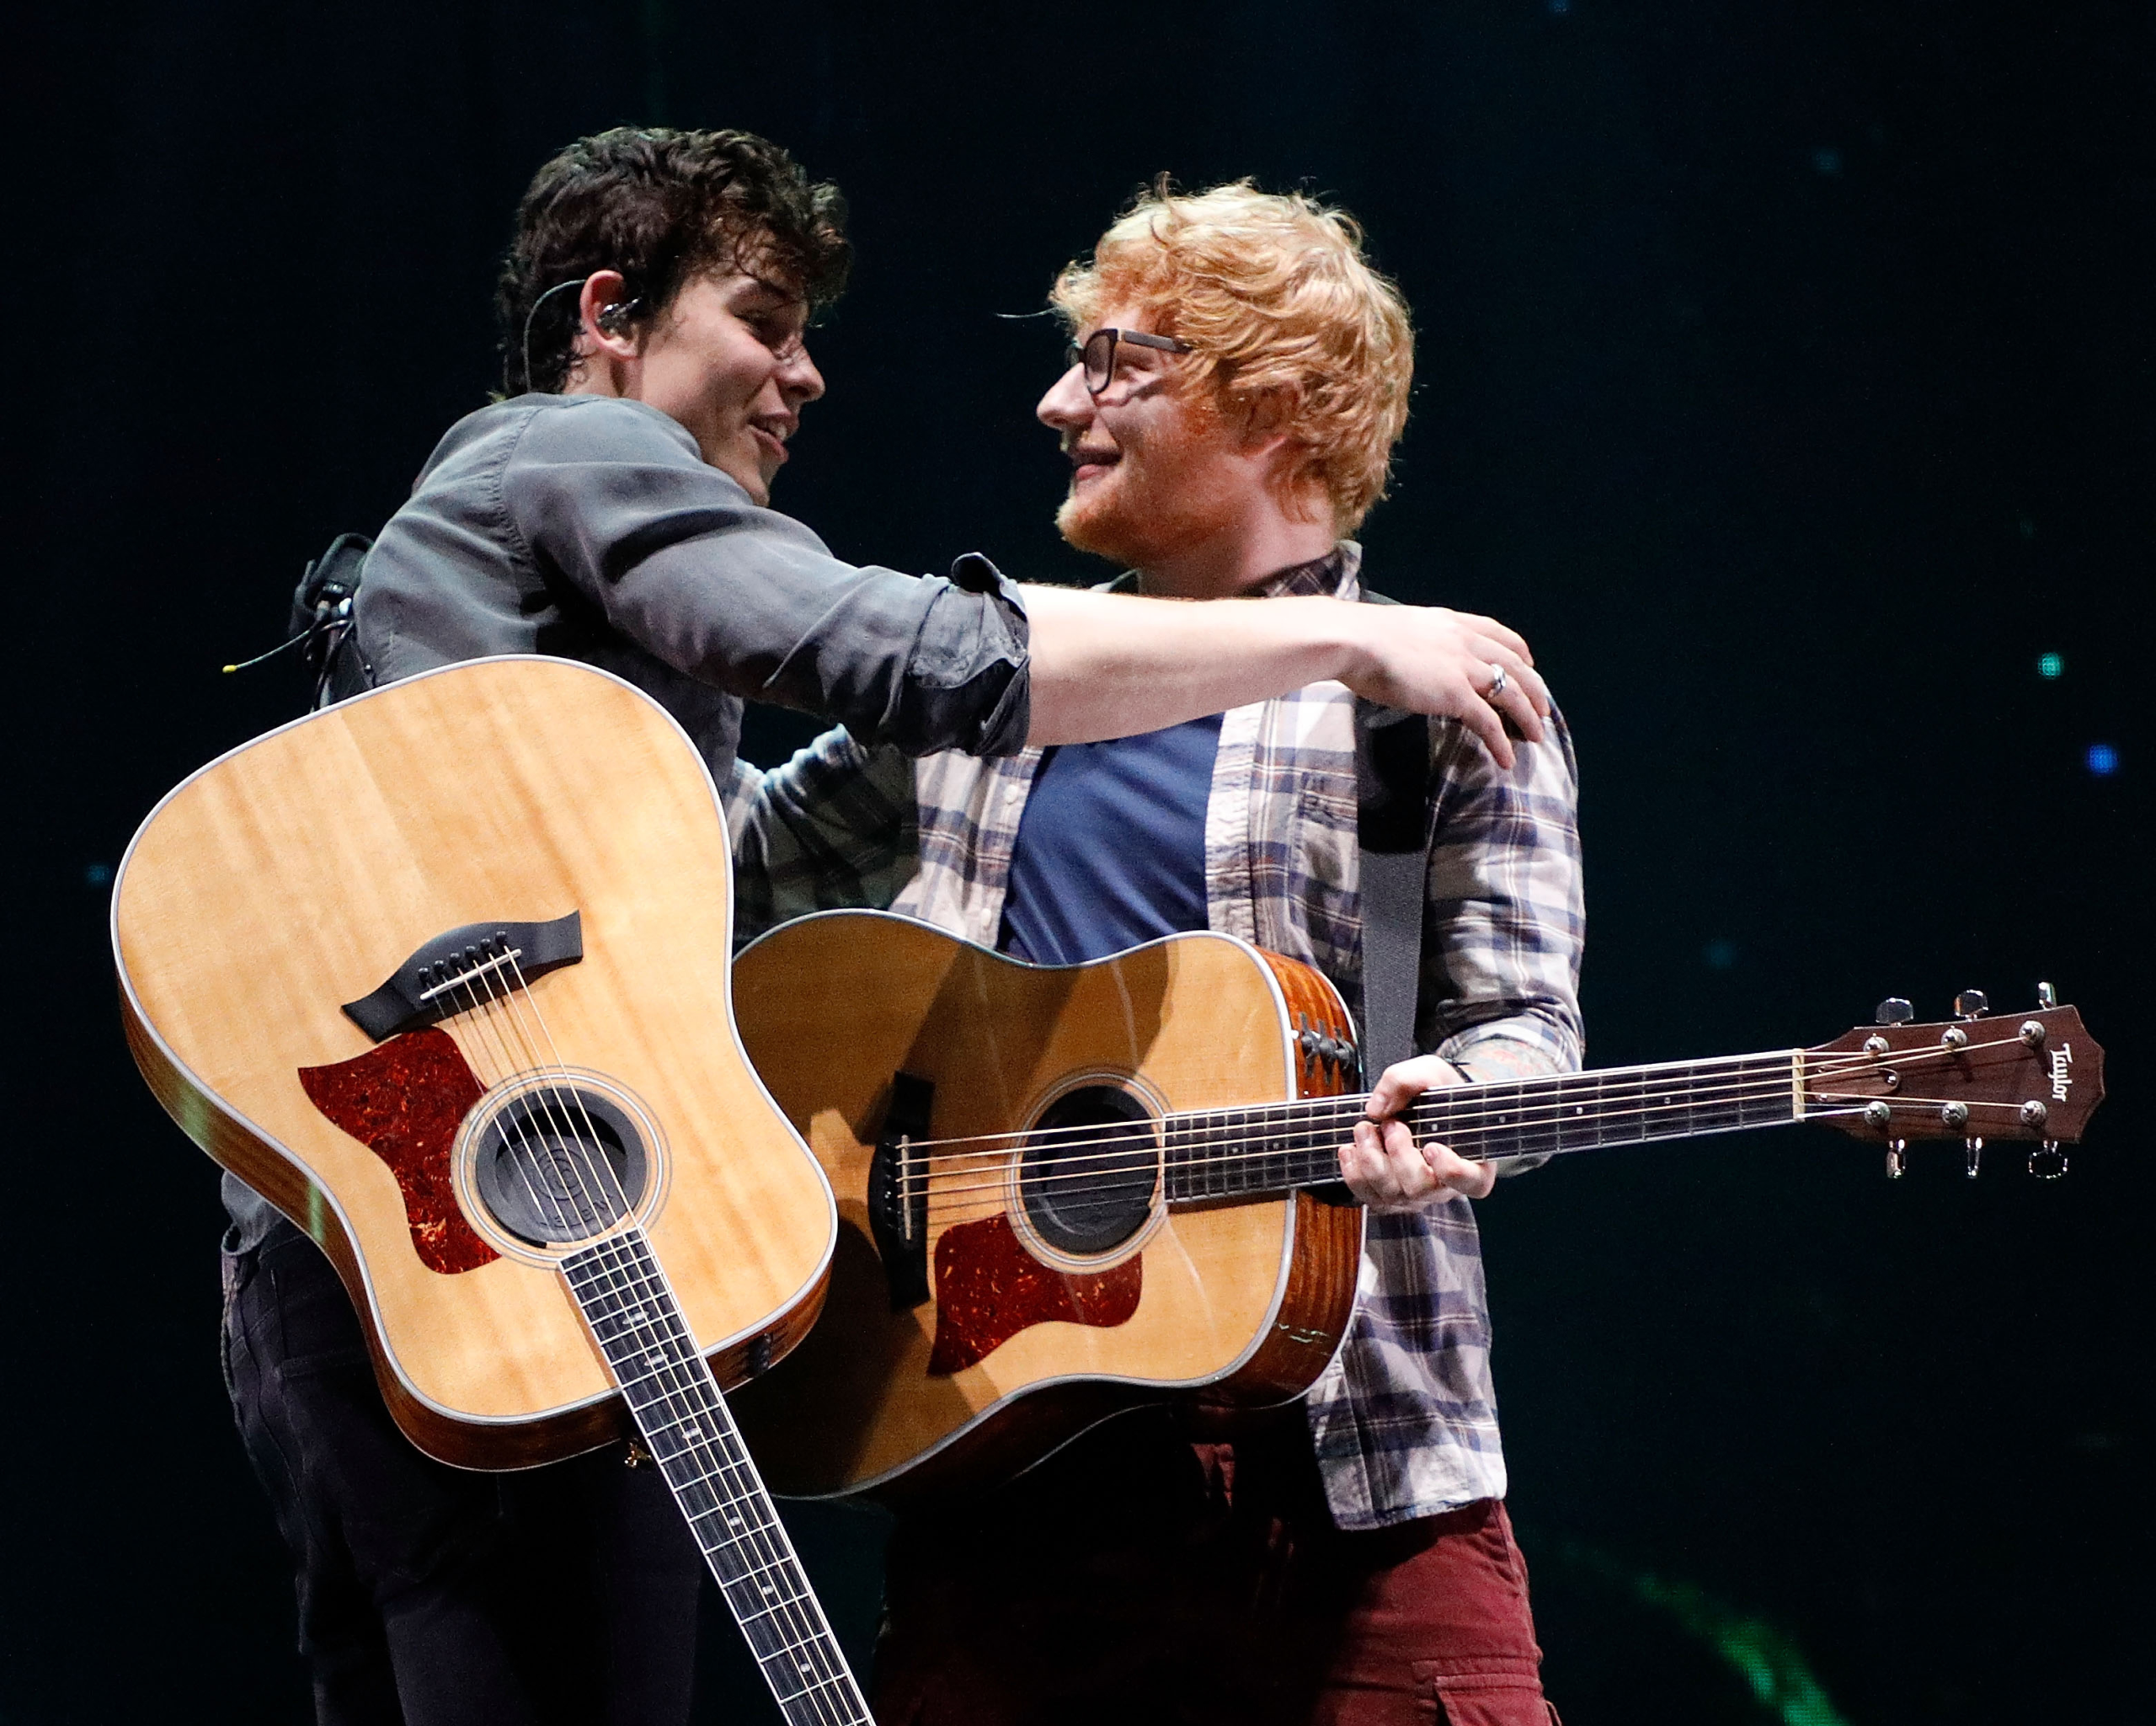 Shawn Mendes and Ed Sheeran performing on stage